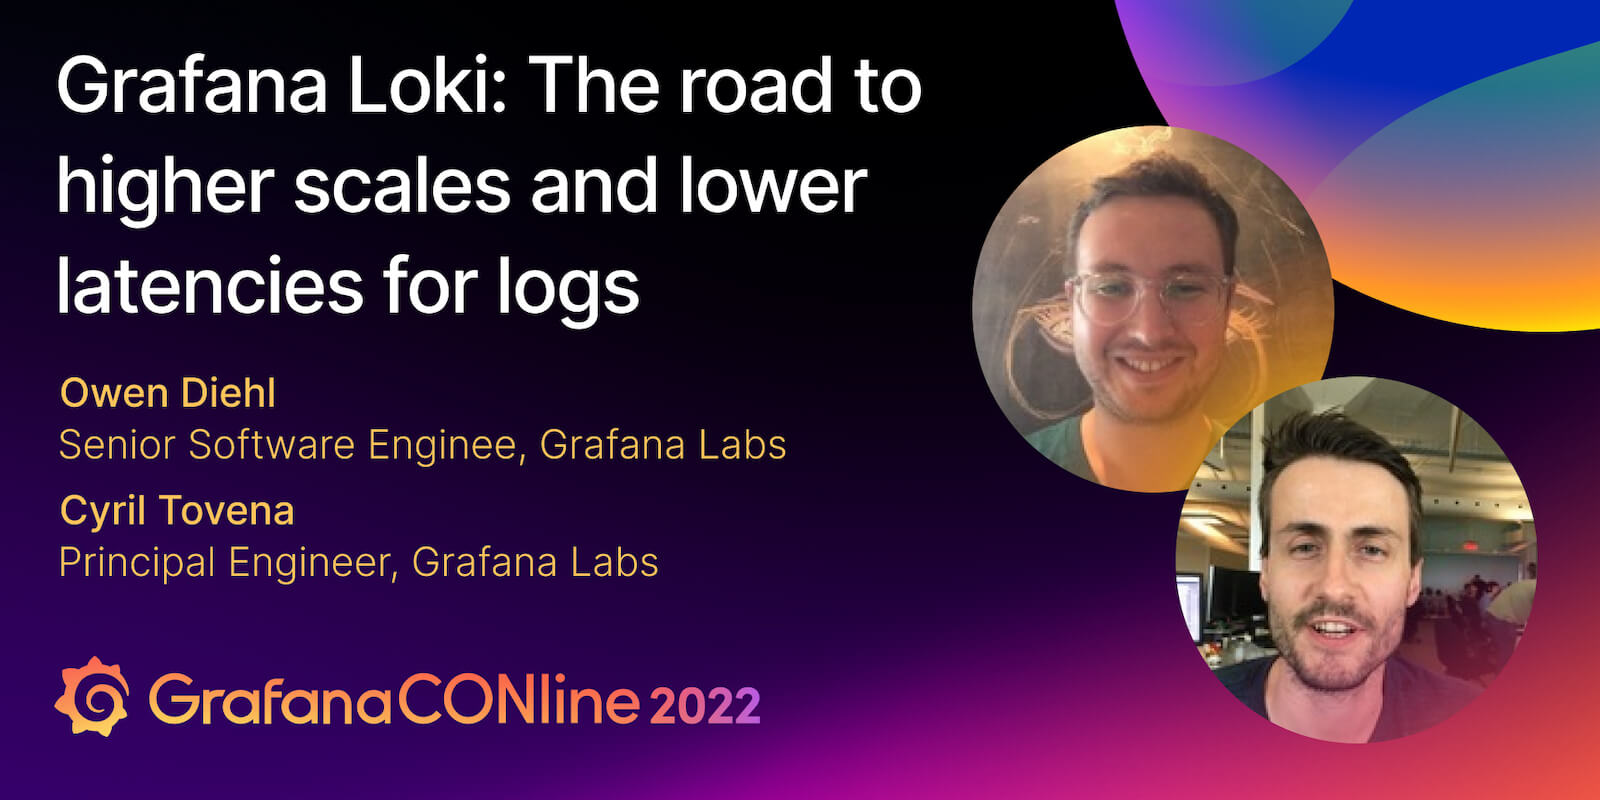 Grafana Loki: The road to higher scales and lower latencies for logs